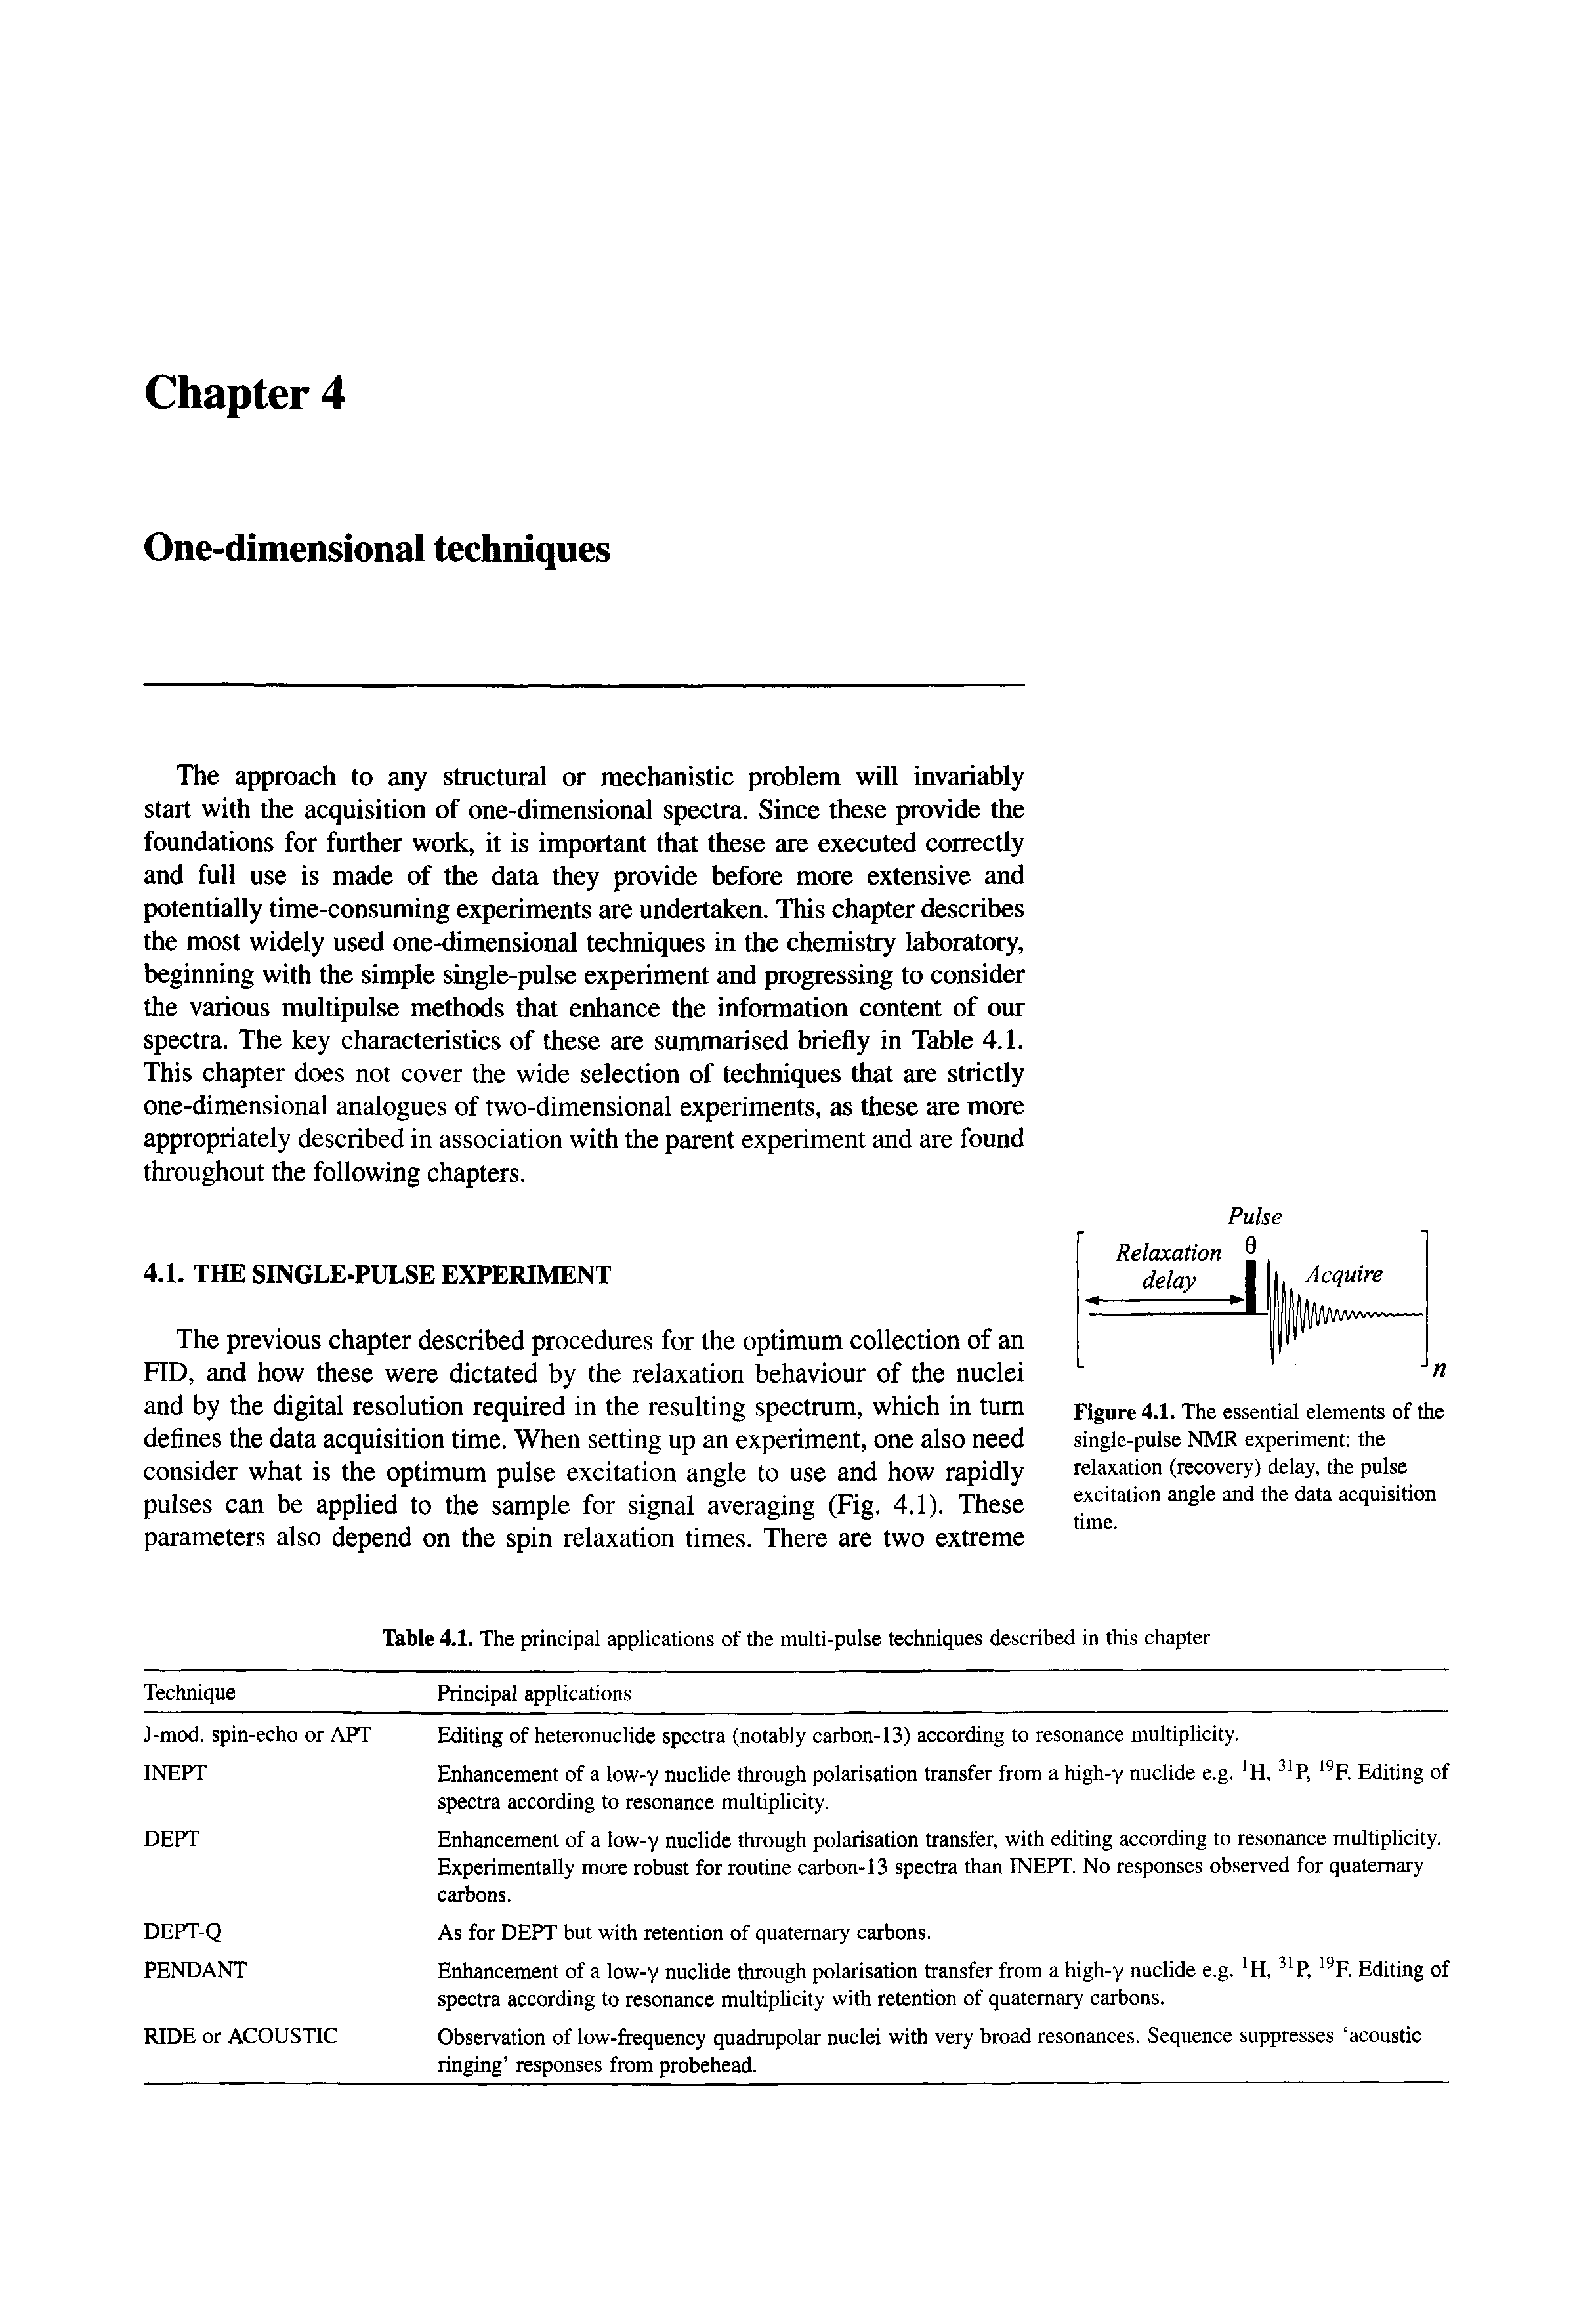 Table 4.1. The principal applications of the multi-pulse techniques described in this chapter...